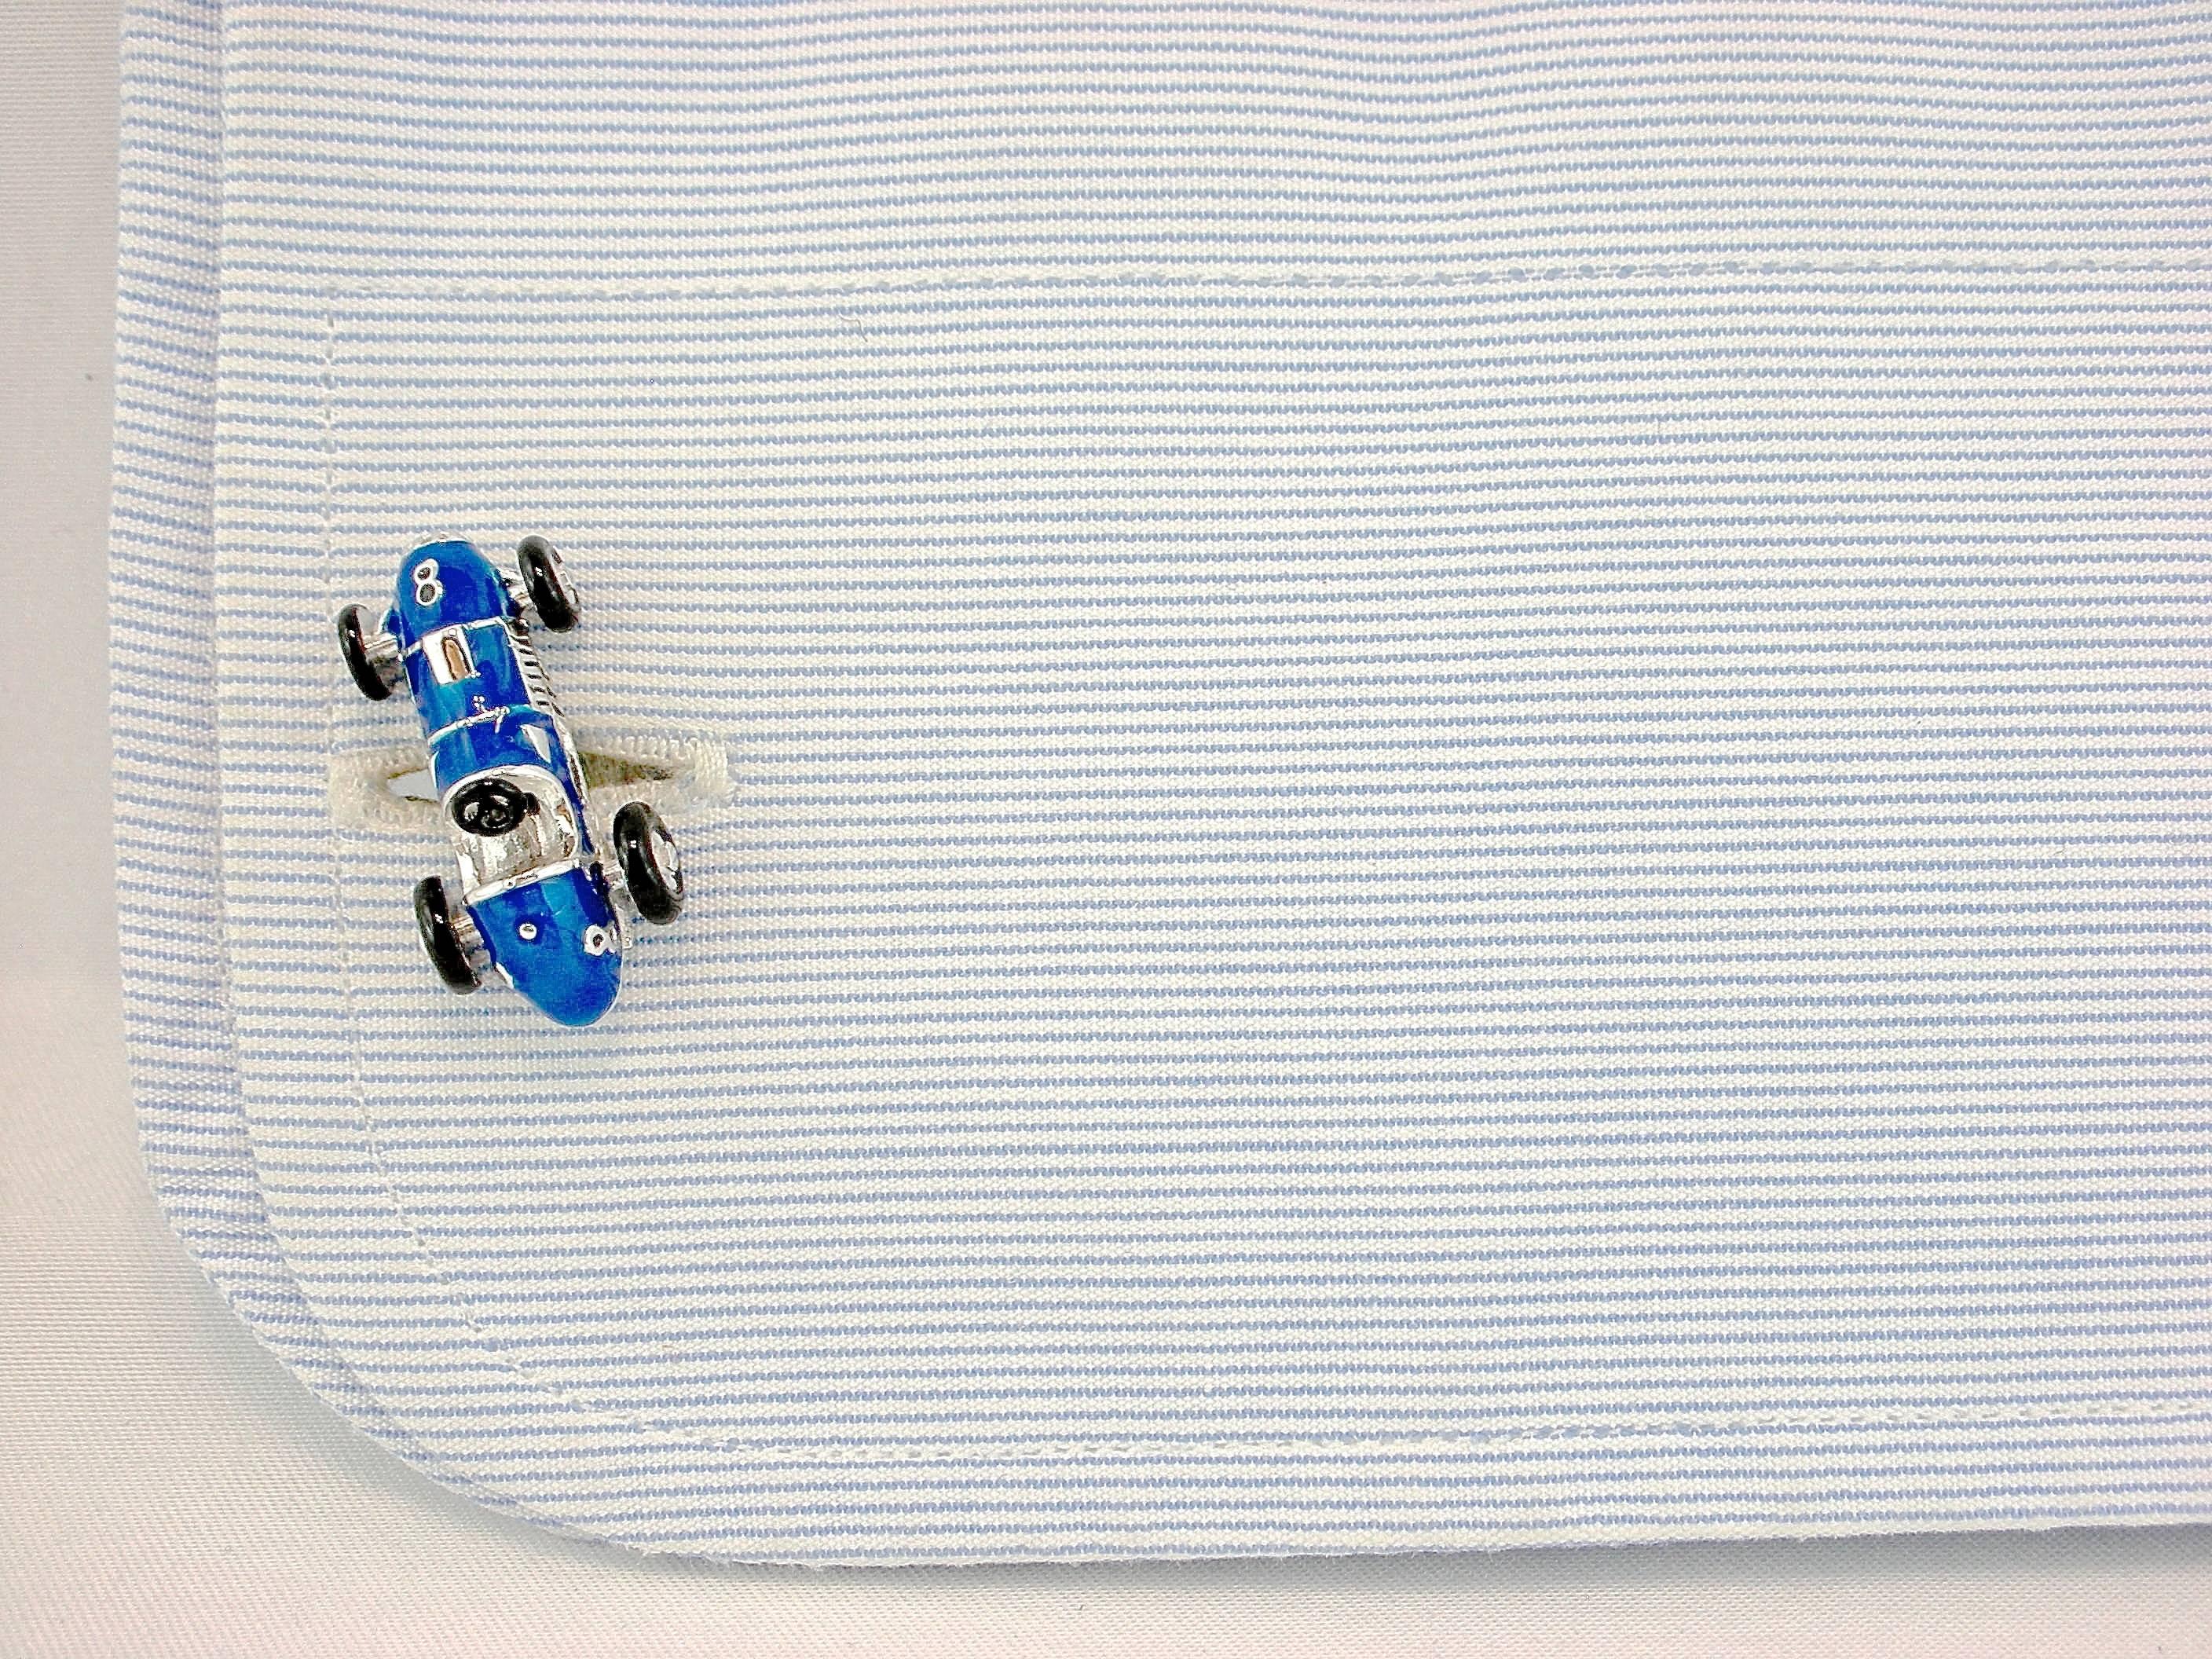 Jona design collection, hand crafted in Italy, rhodium plated sterling silver cufflinks with blue enamel. Marked 